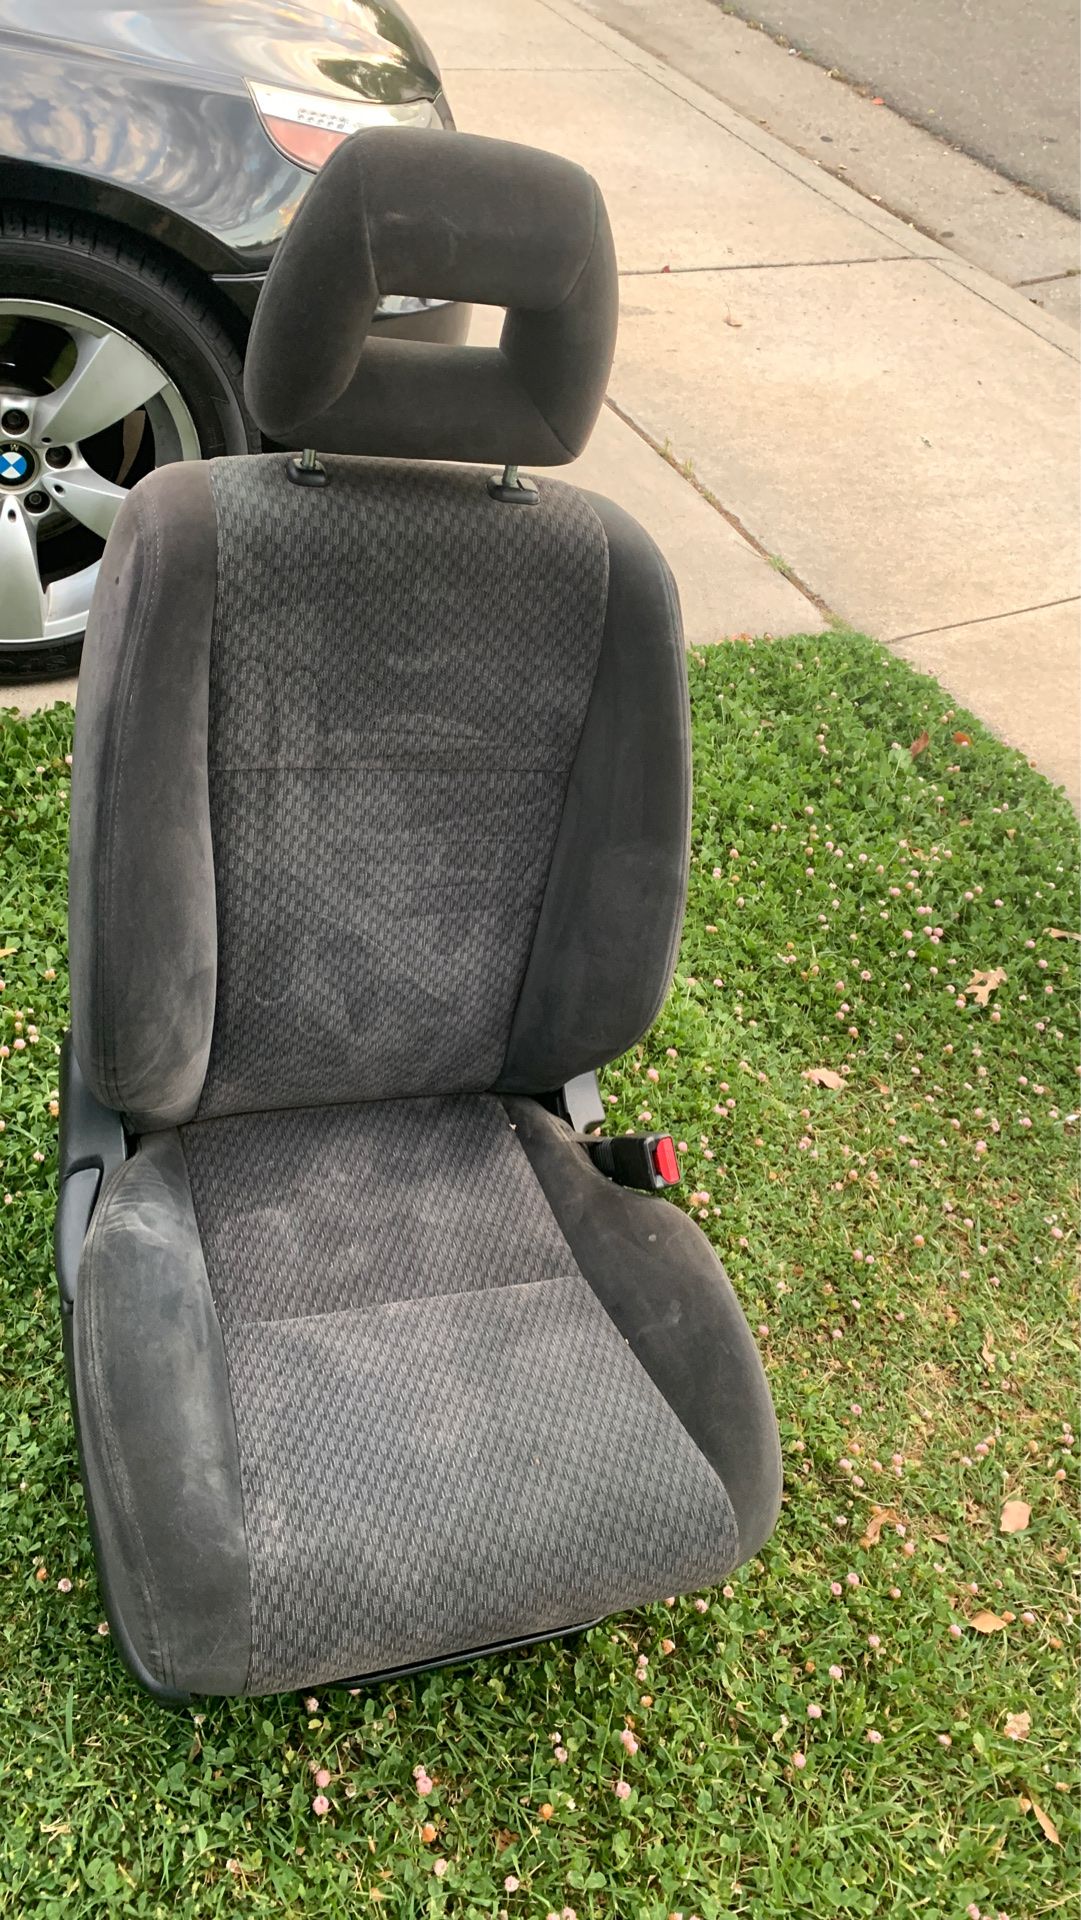 Complete 2005 2 door Honda Civic seats . 2 front, and rear